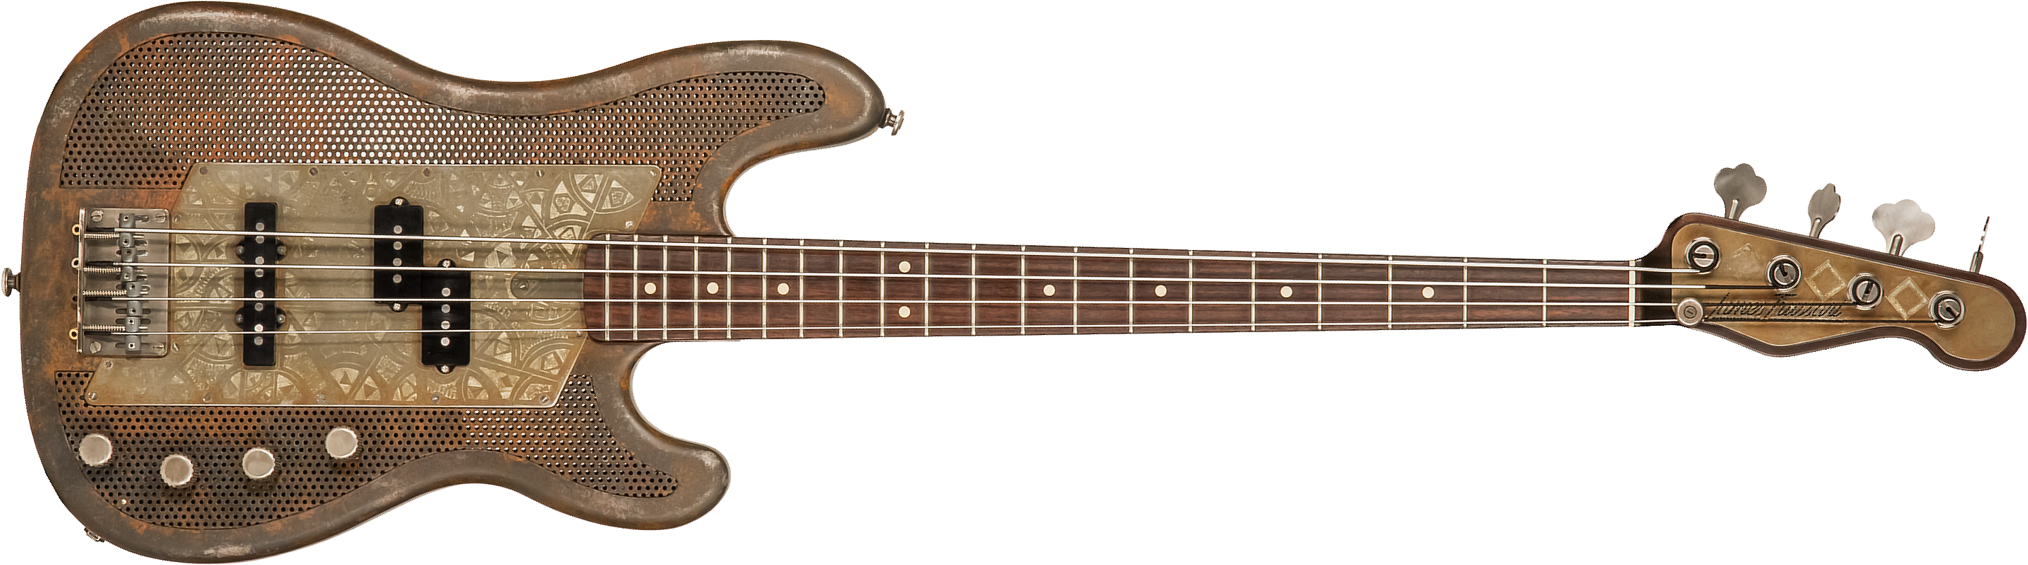 James Trussart Steelcaster Bass Perforated Active Pf #19045 - Rust O Matic African Engraved - Solidbody E-bass - Main picture